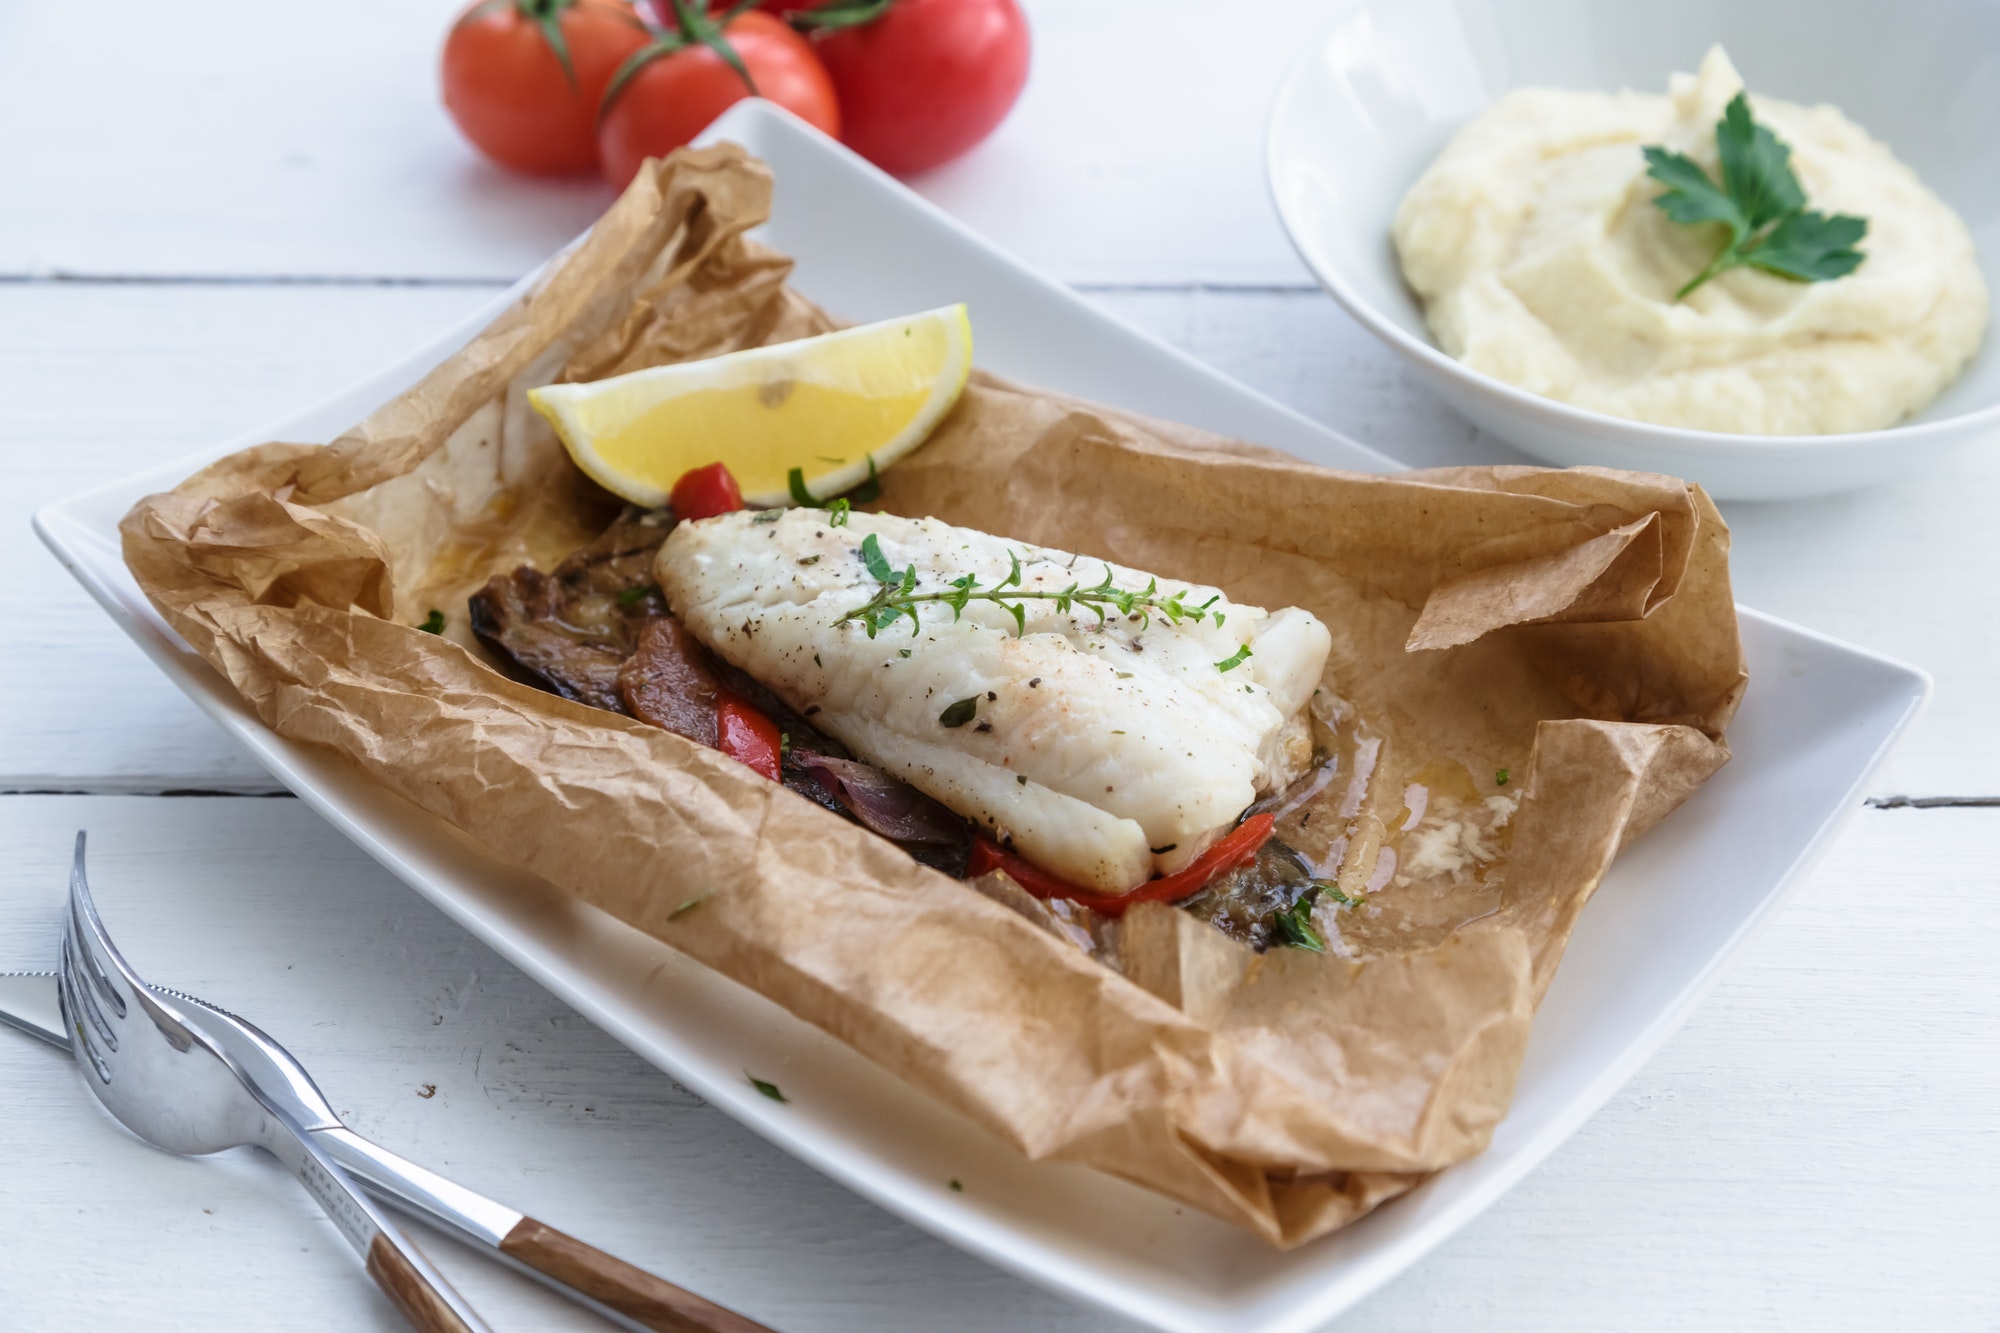 Cod fillets baked in parchment paper with vegetables